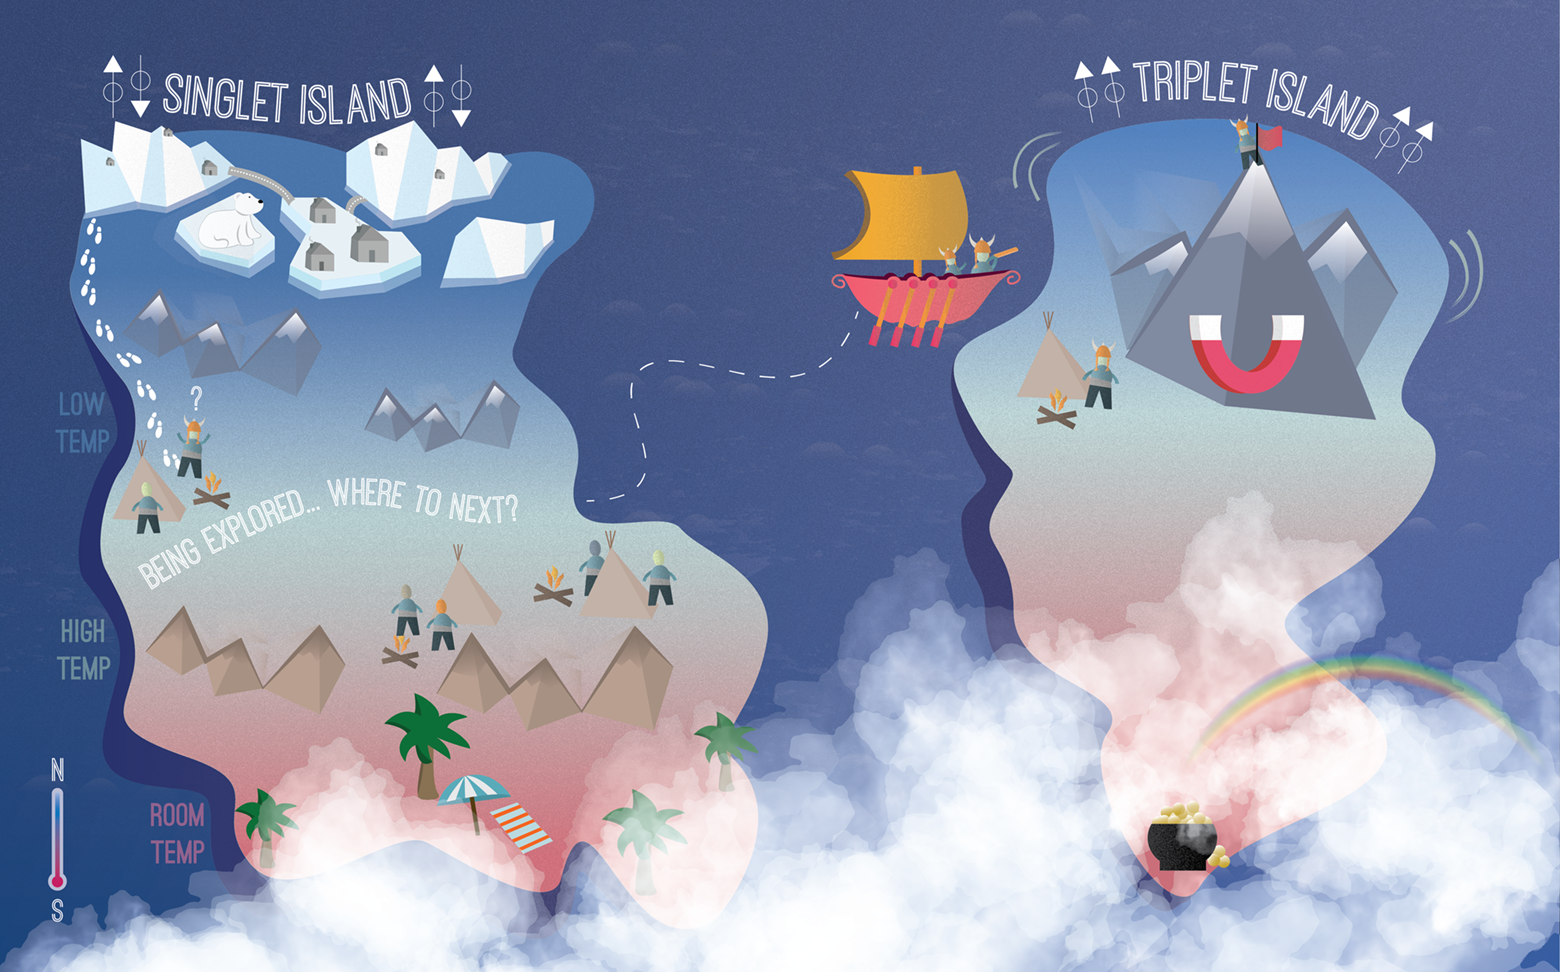  We have already found lots of superconductors, but this whimsical illustration shows why one superconductor's newfound properties may make it especially useful. Most known superconductors are spin singlets, found on the island to the left. Uranium ditelluride, however, is a rare spin triplet, found on the island to the right, and also exists at the top of a mountain representing its unusually high resistance to magnetic fields. These properties may make it a good material for making qubits, which could maintain coherence in a quantum computer despite interference from the surrounding environment. Credit: N. Hanacek/NIST